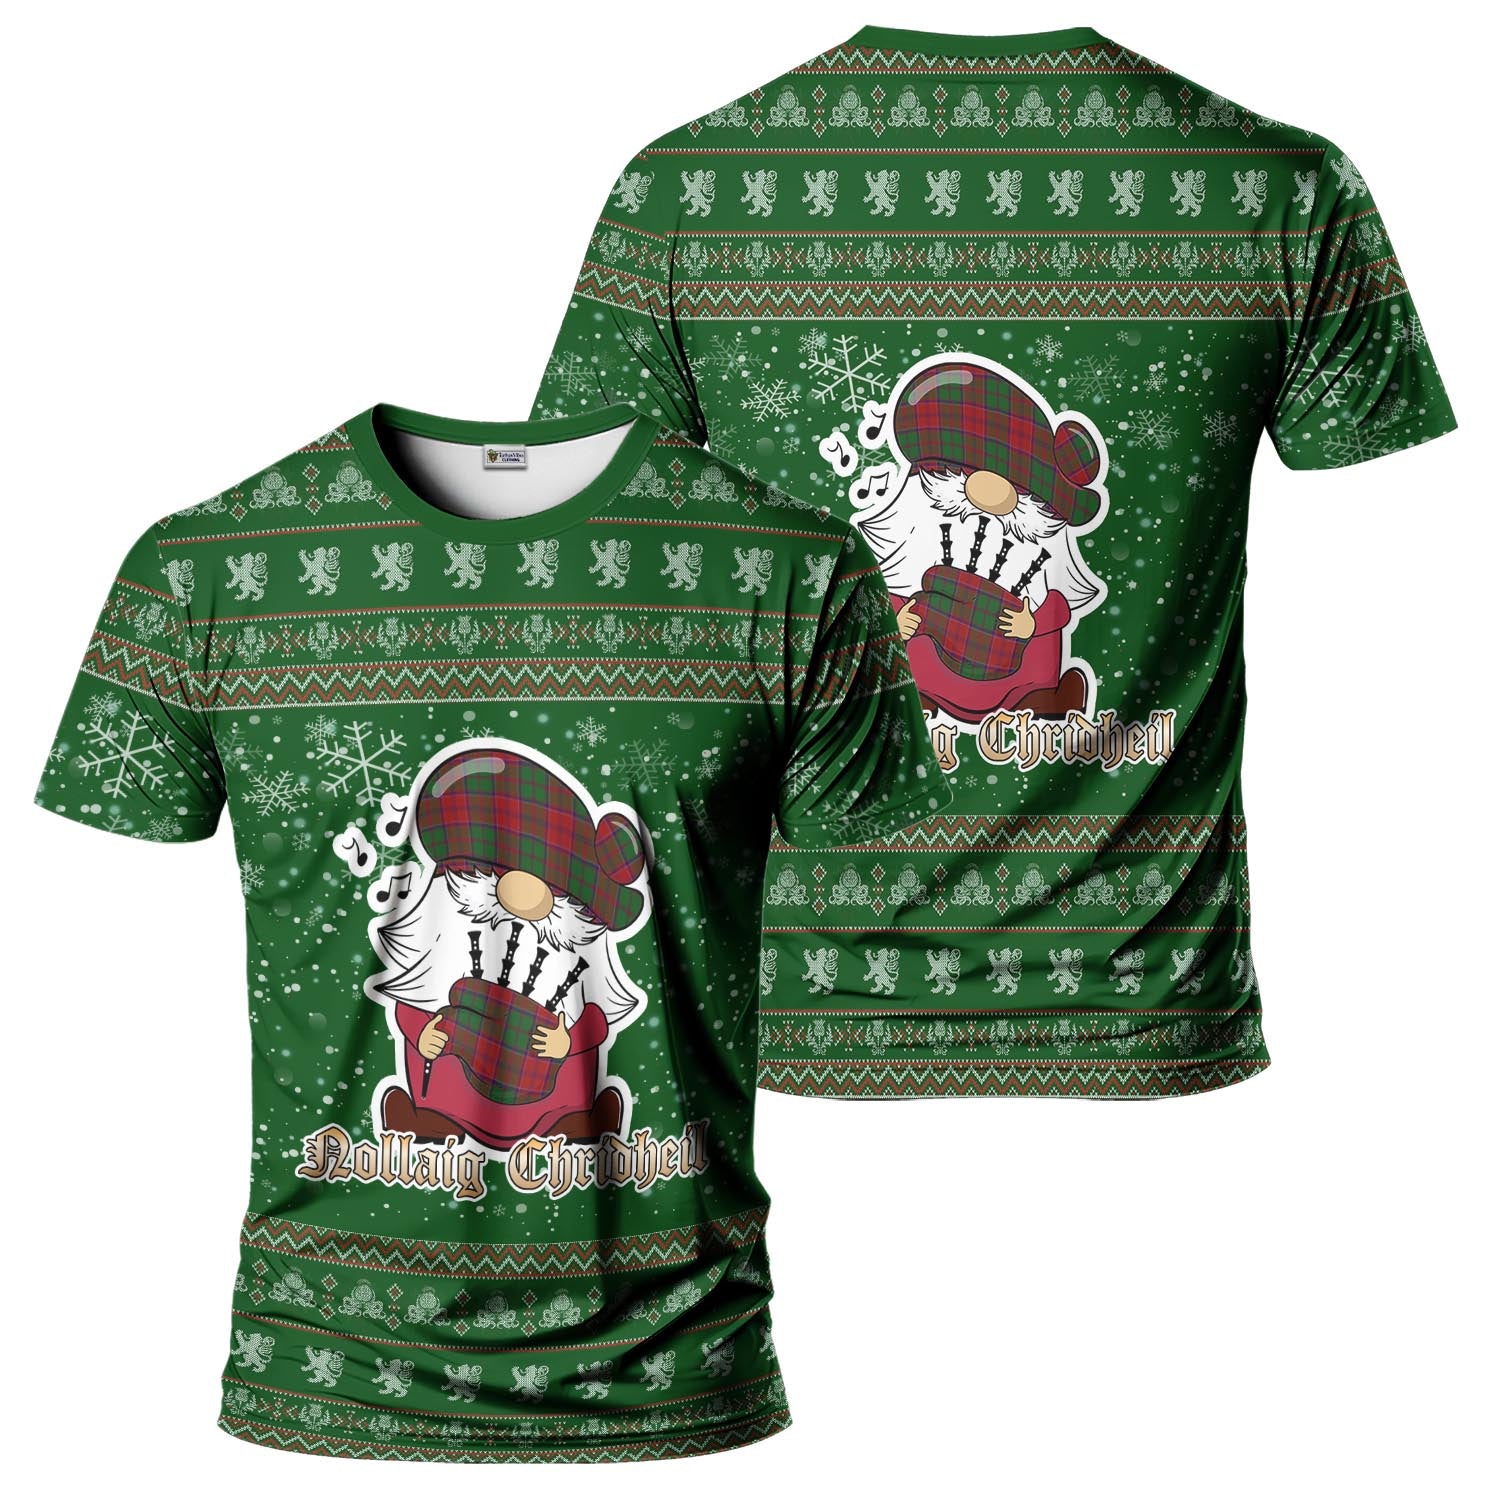 Grant Clan Christmas Family T-Shirt with Funny Gnome Playing Bagpipes Men's Shirt Green - Tartanvibesclothing